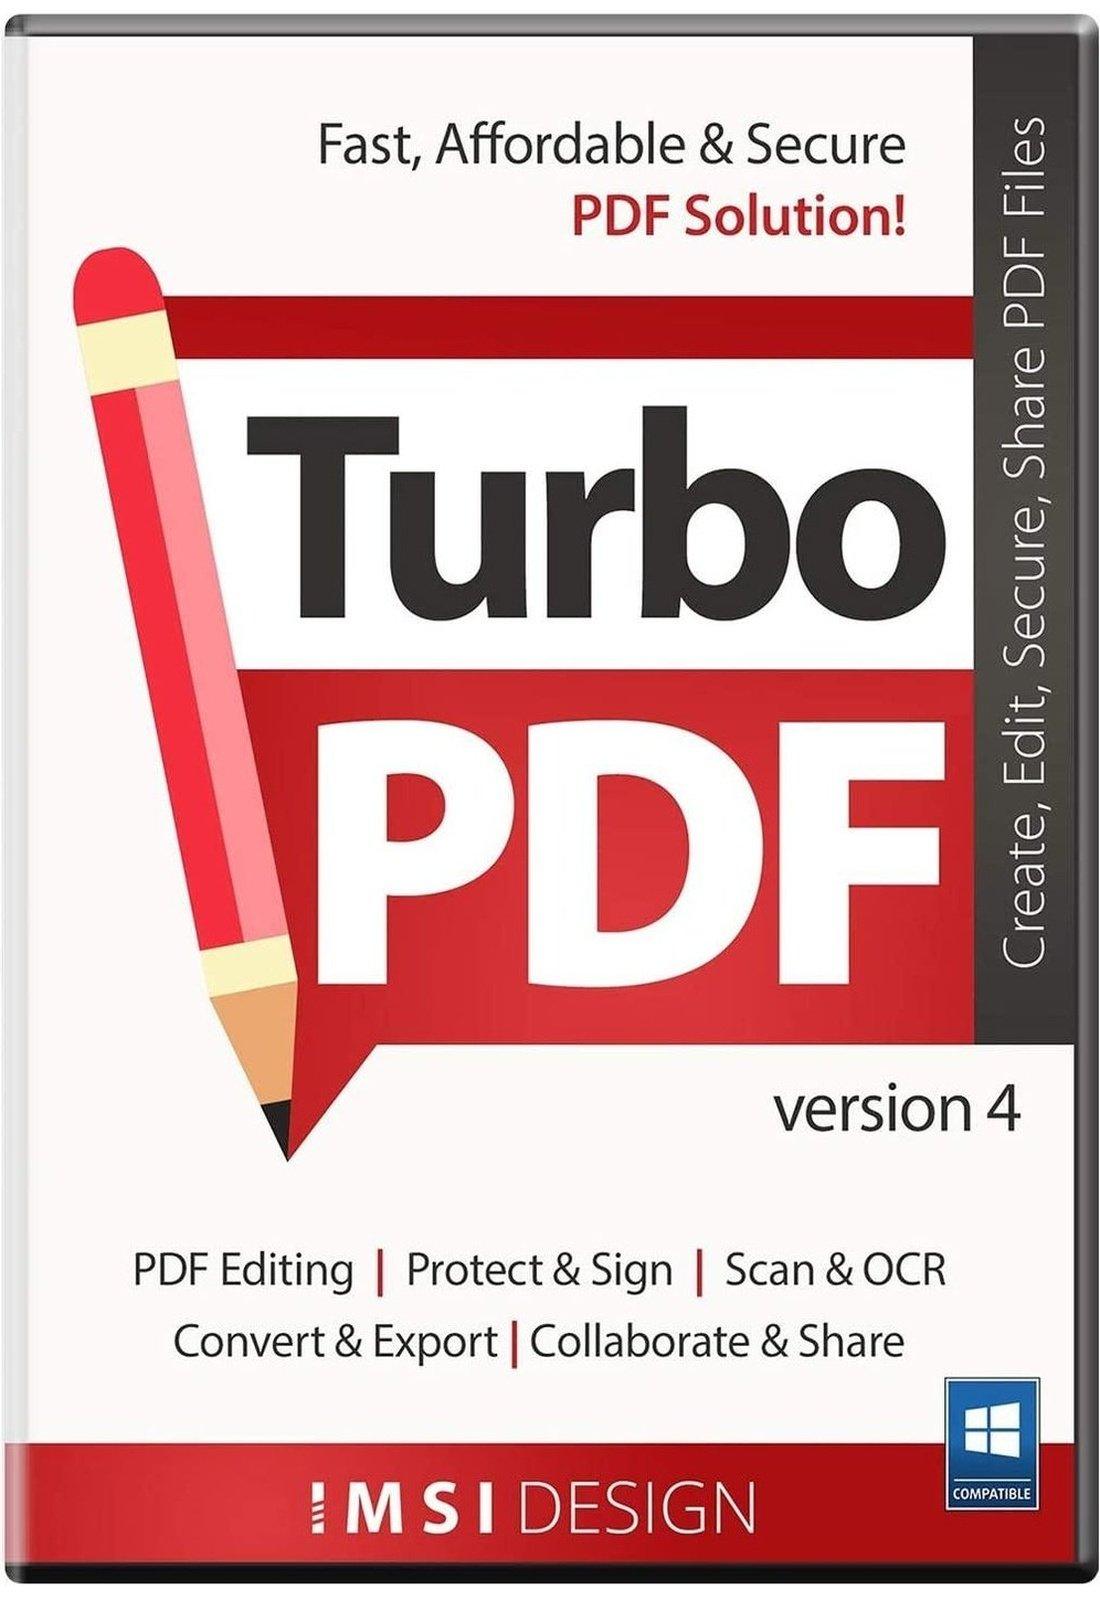 TurboPDF v4 - Instant Download for Windows (1 Computer) - SoftwareCW - Authorized Reseller